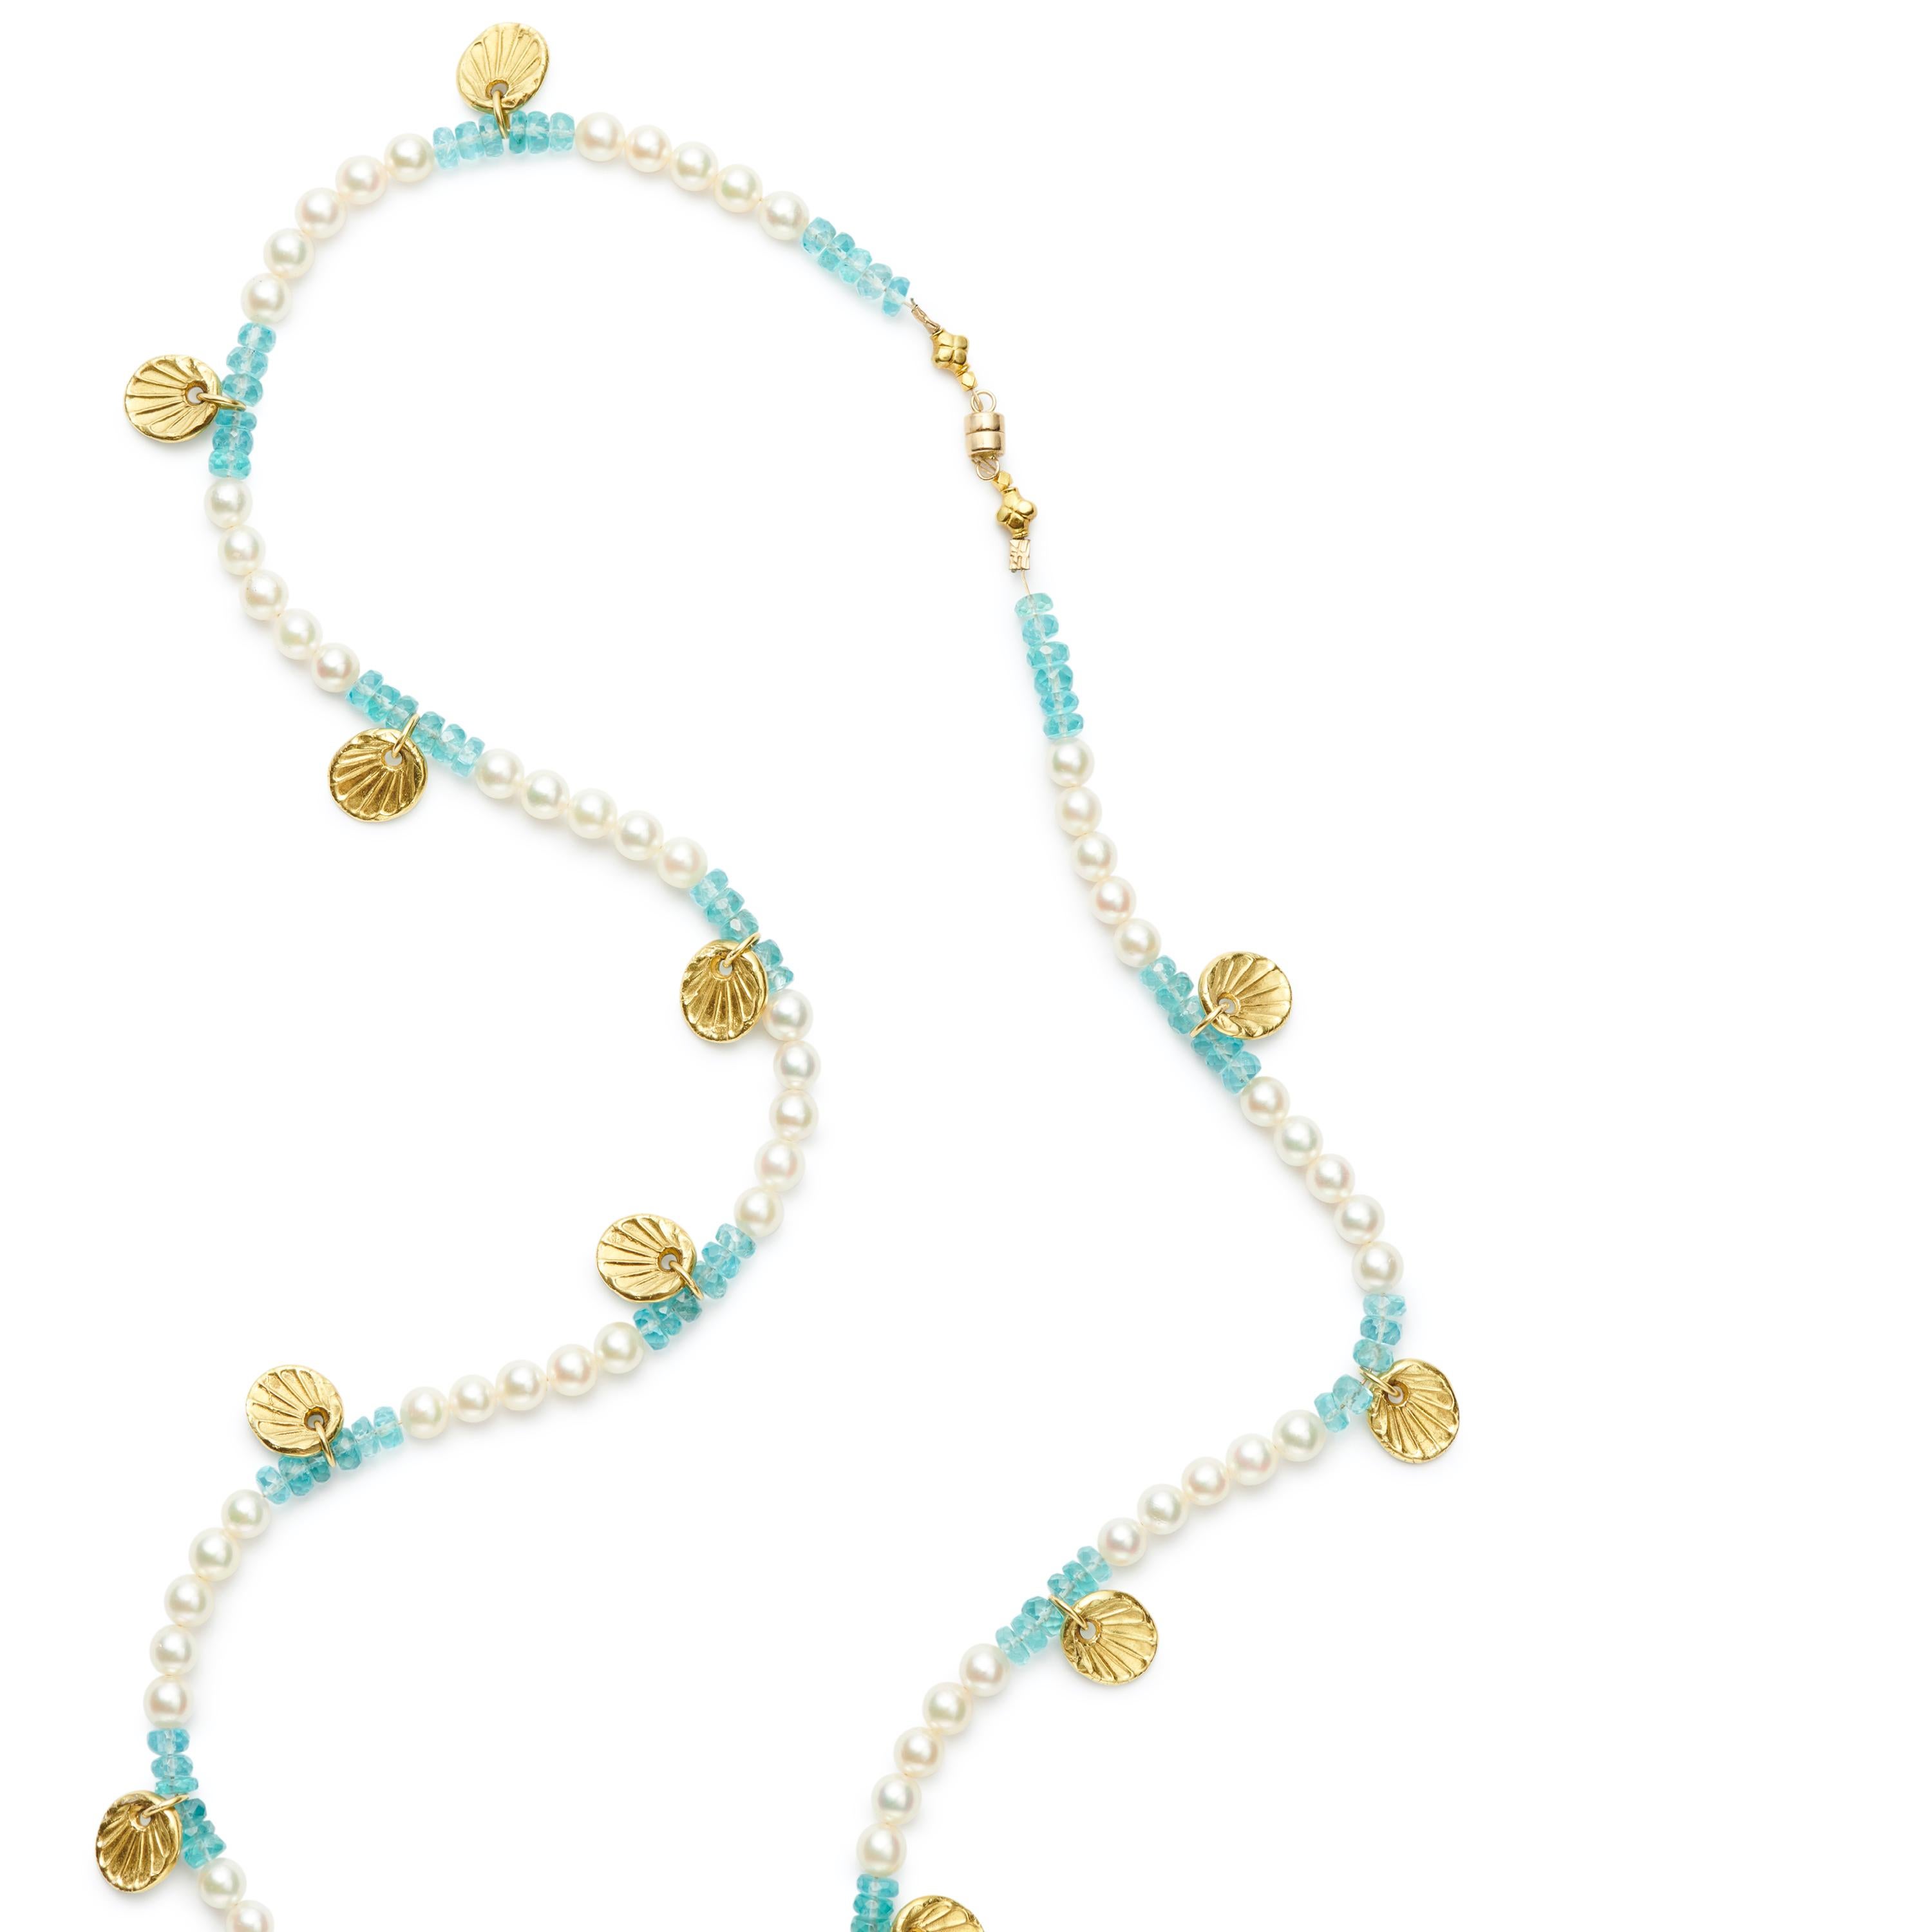 26 inch freshwater pearl and apatite bead necklace with 18kt gold scallop shells and magnetic clasp